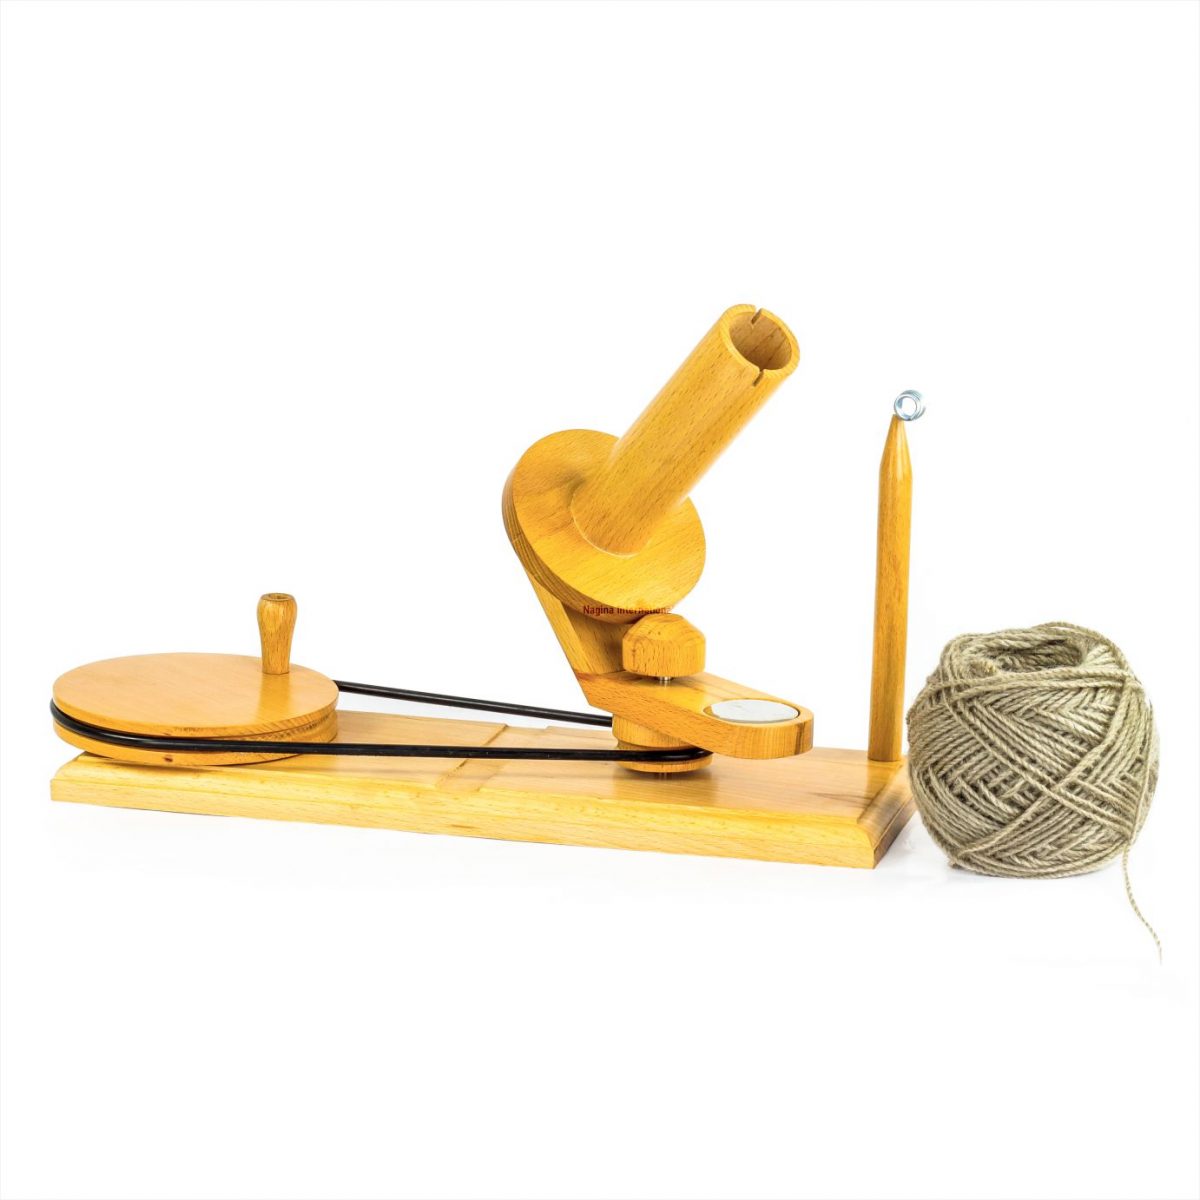  Wooden Yarn Ball Winder - Handcrafted Large Yarn Winder for  Knitting & Crocheting - Hand Operated Heavy Duty Natural Ball Winder  (Beechwood Combo (Winder+Swift))